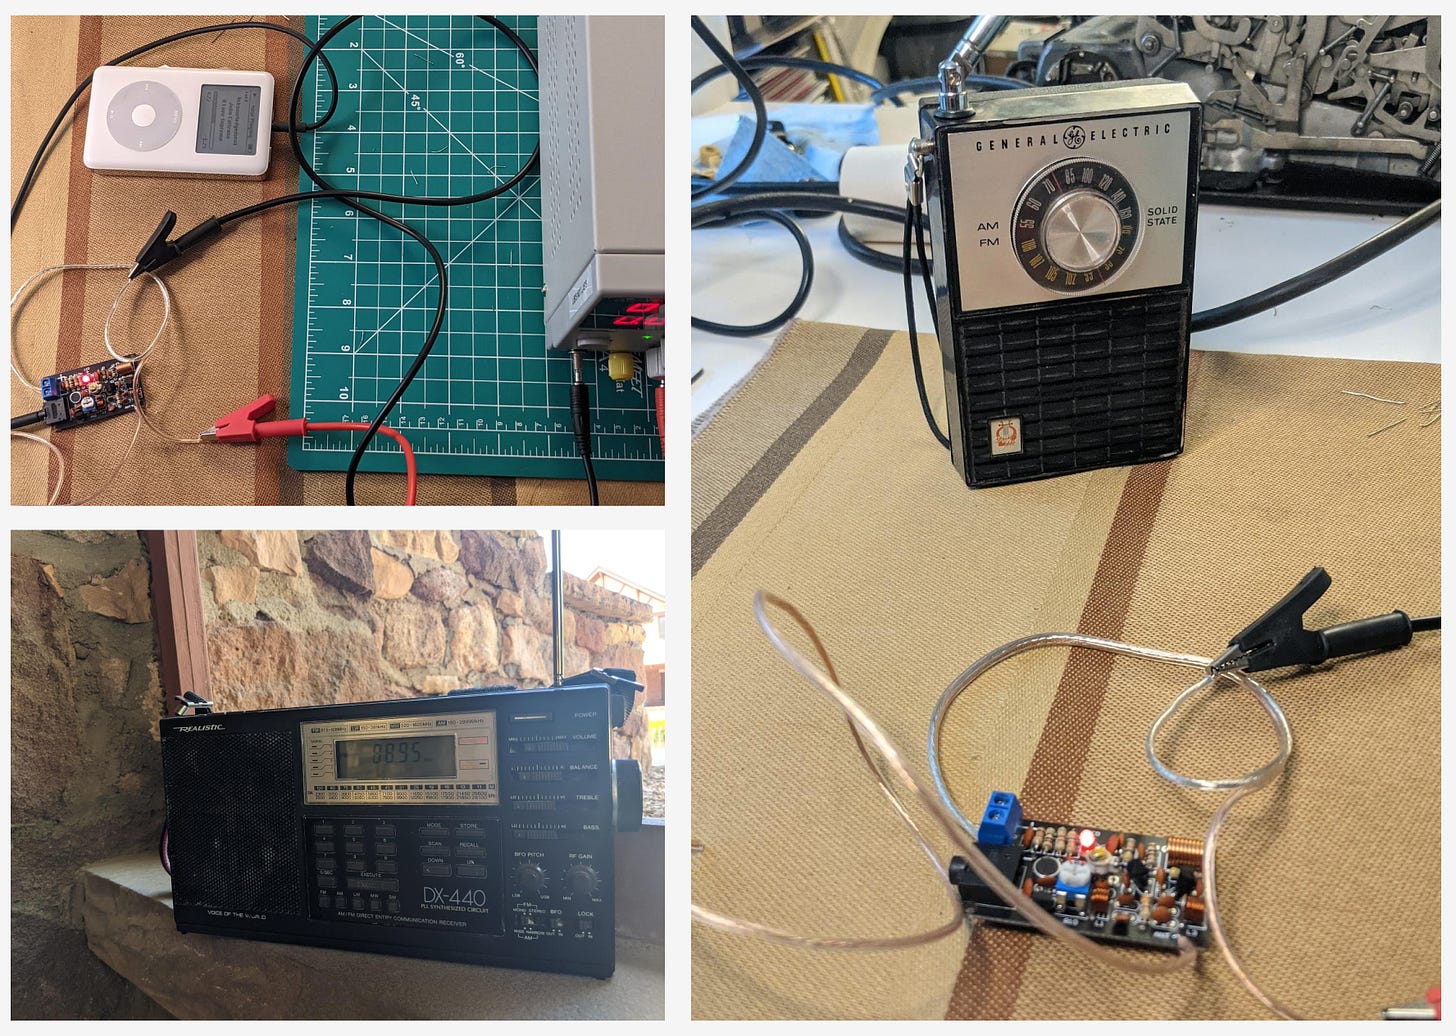 3 images - top left: GE transistor radio, fm radio transmitter, bottom left: DX-440 Shortwave Radio on a stone ledge, right: an ipod, a power supply, and an fm radio transmitter-on-a-board all wired together on a cutting mat